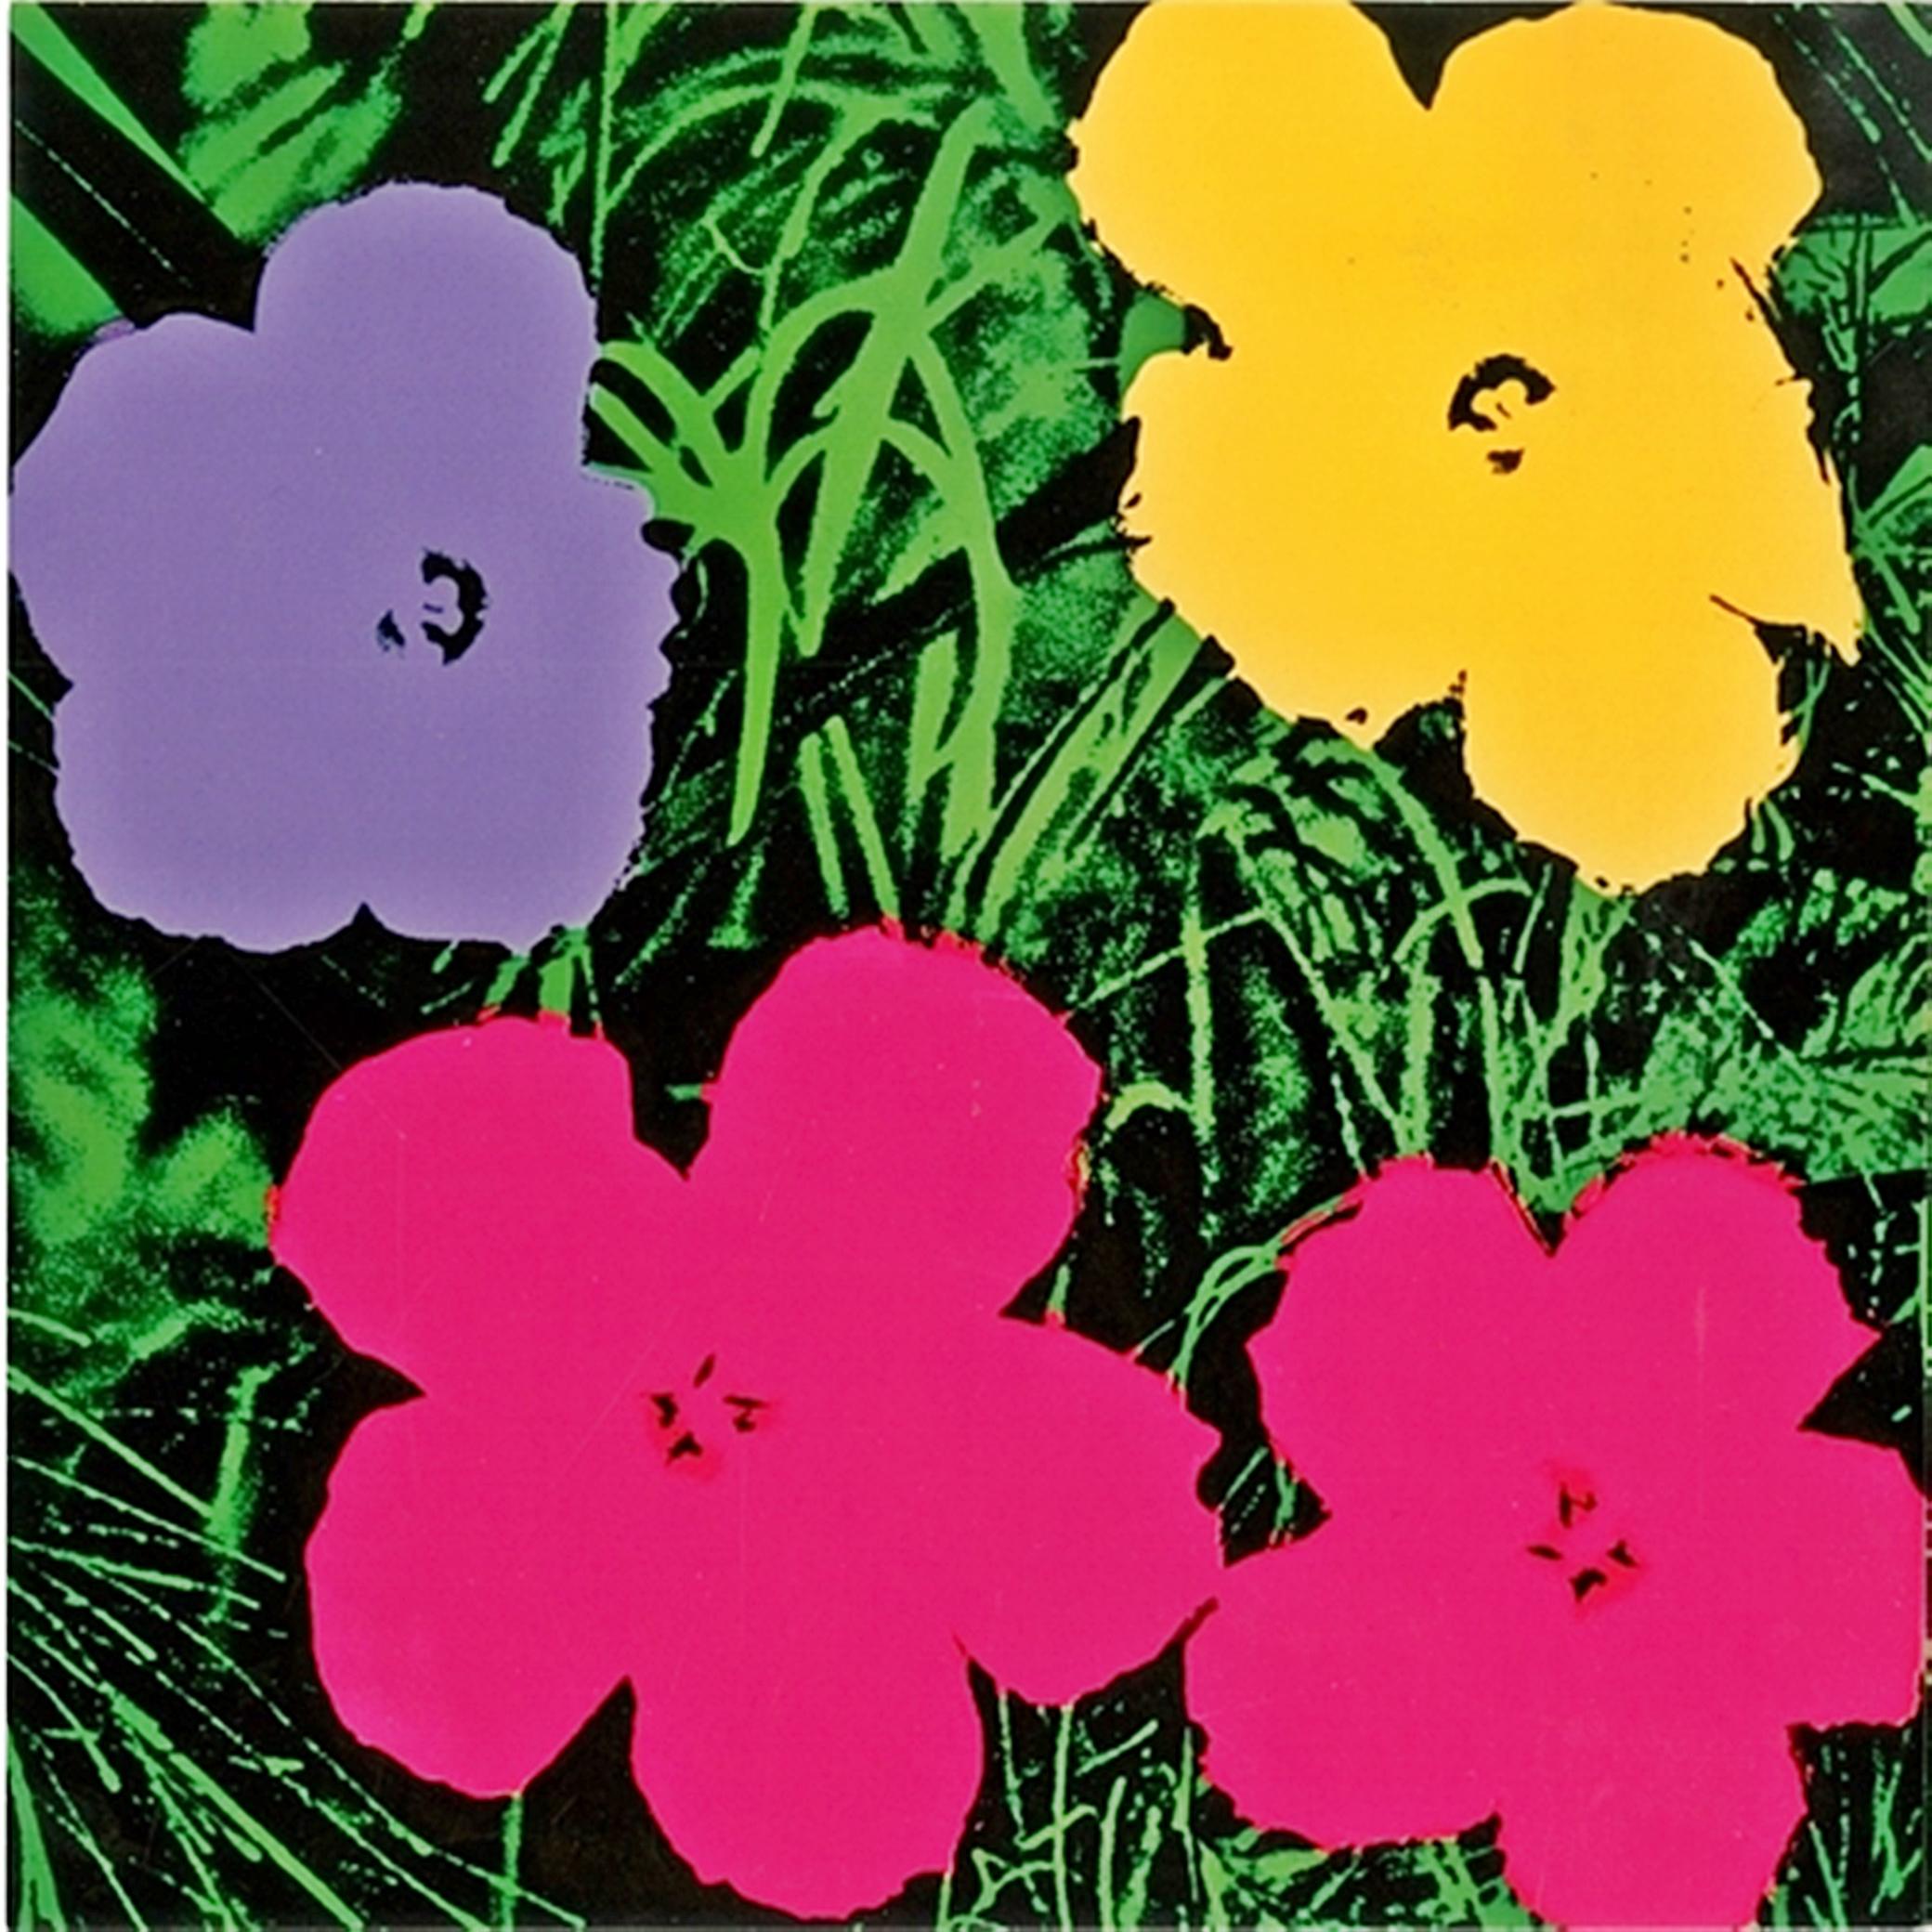 Flowers, Galerie Sonnabend announcement invitation card addressed with postmark - Art by Andy Warhol